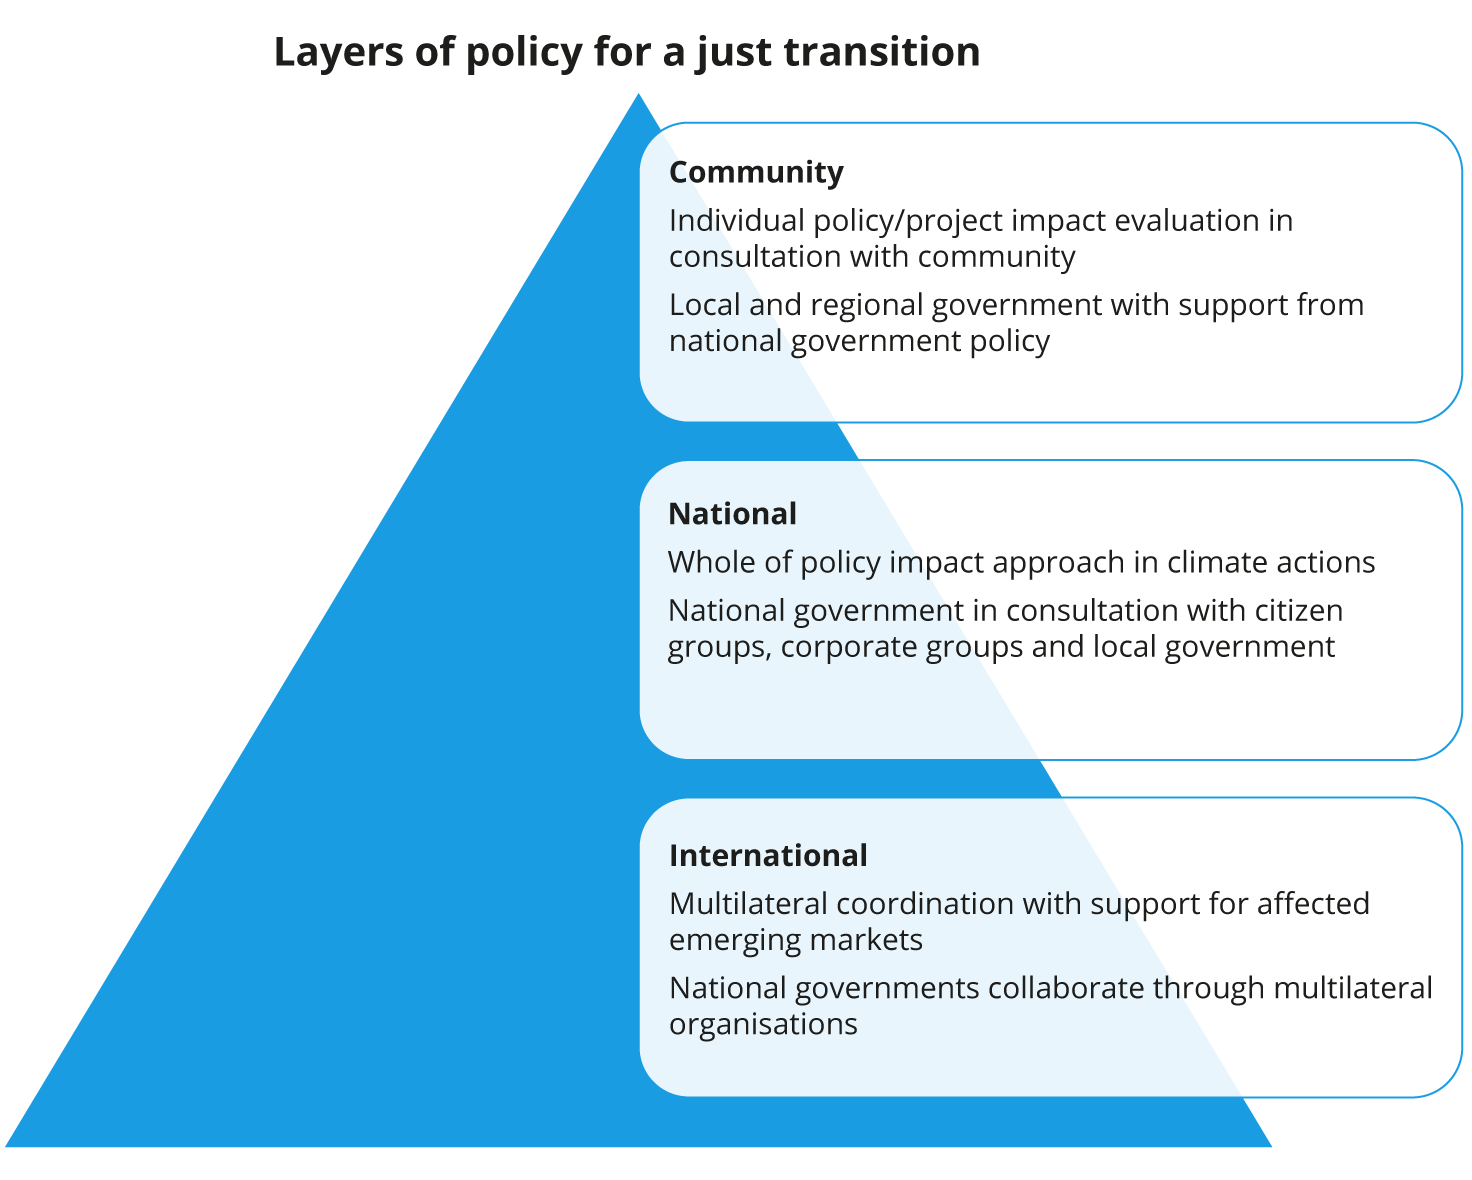 Community, National, International - Layers of policy for a just transition